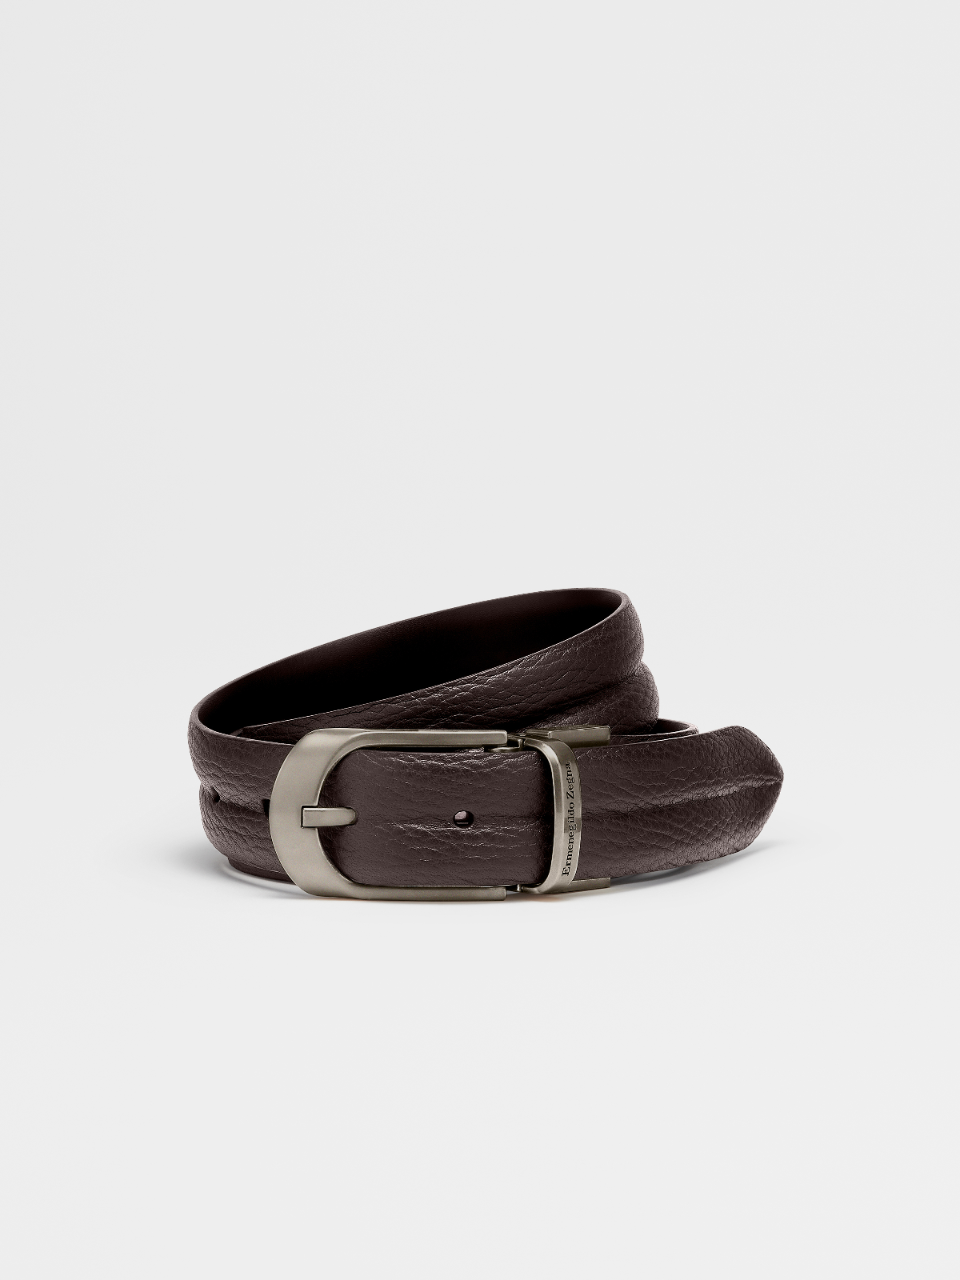 Dark Brown Grained Leather and Black Smooth Leather Reversible Belt